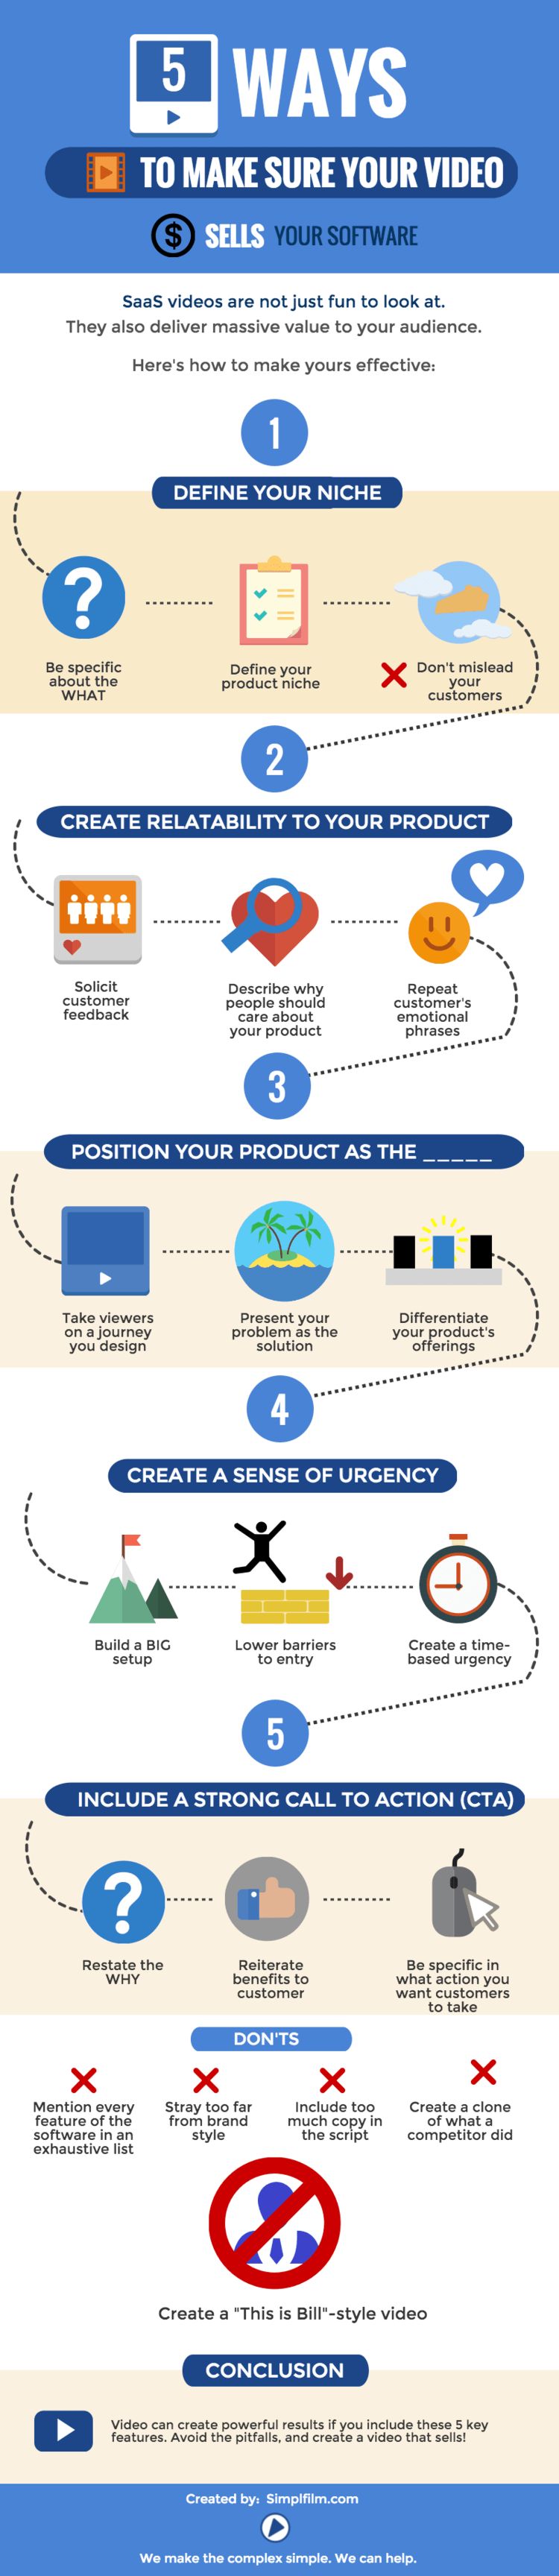 5-ways-to-make-sure-your-video-sells-your-software-infographic-by-simplifilm